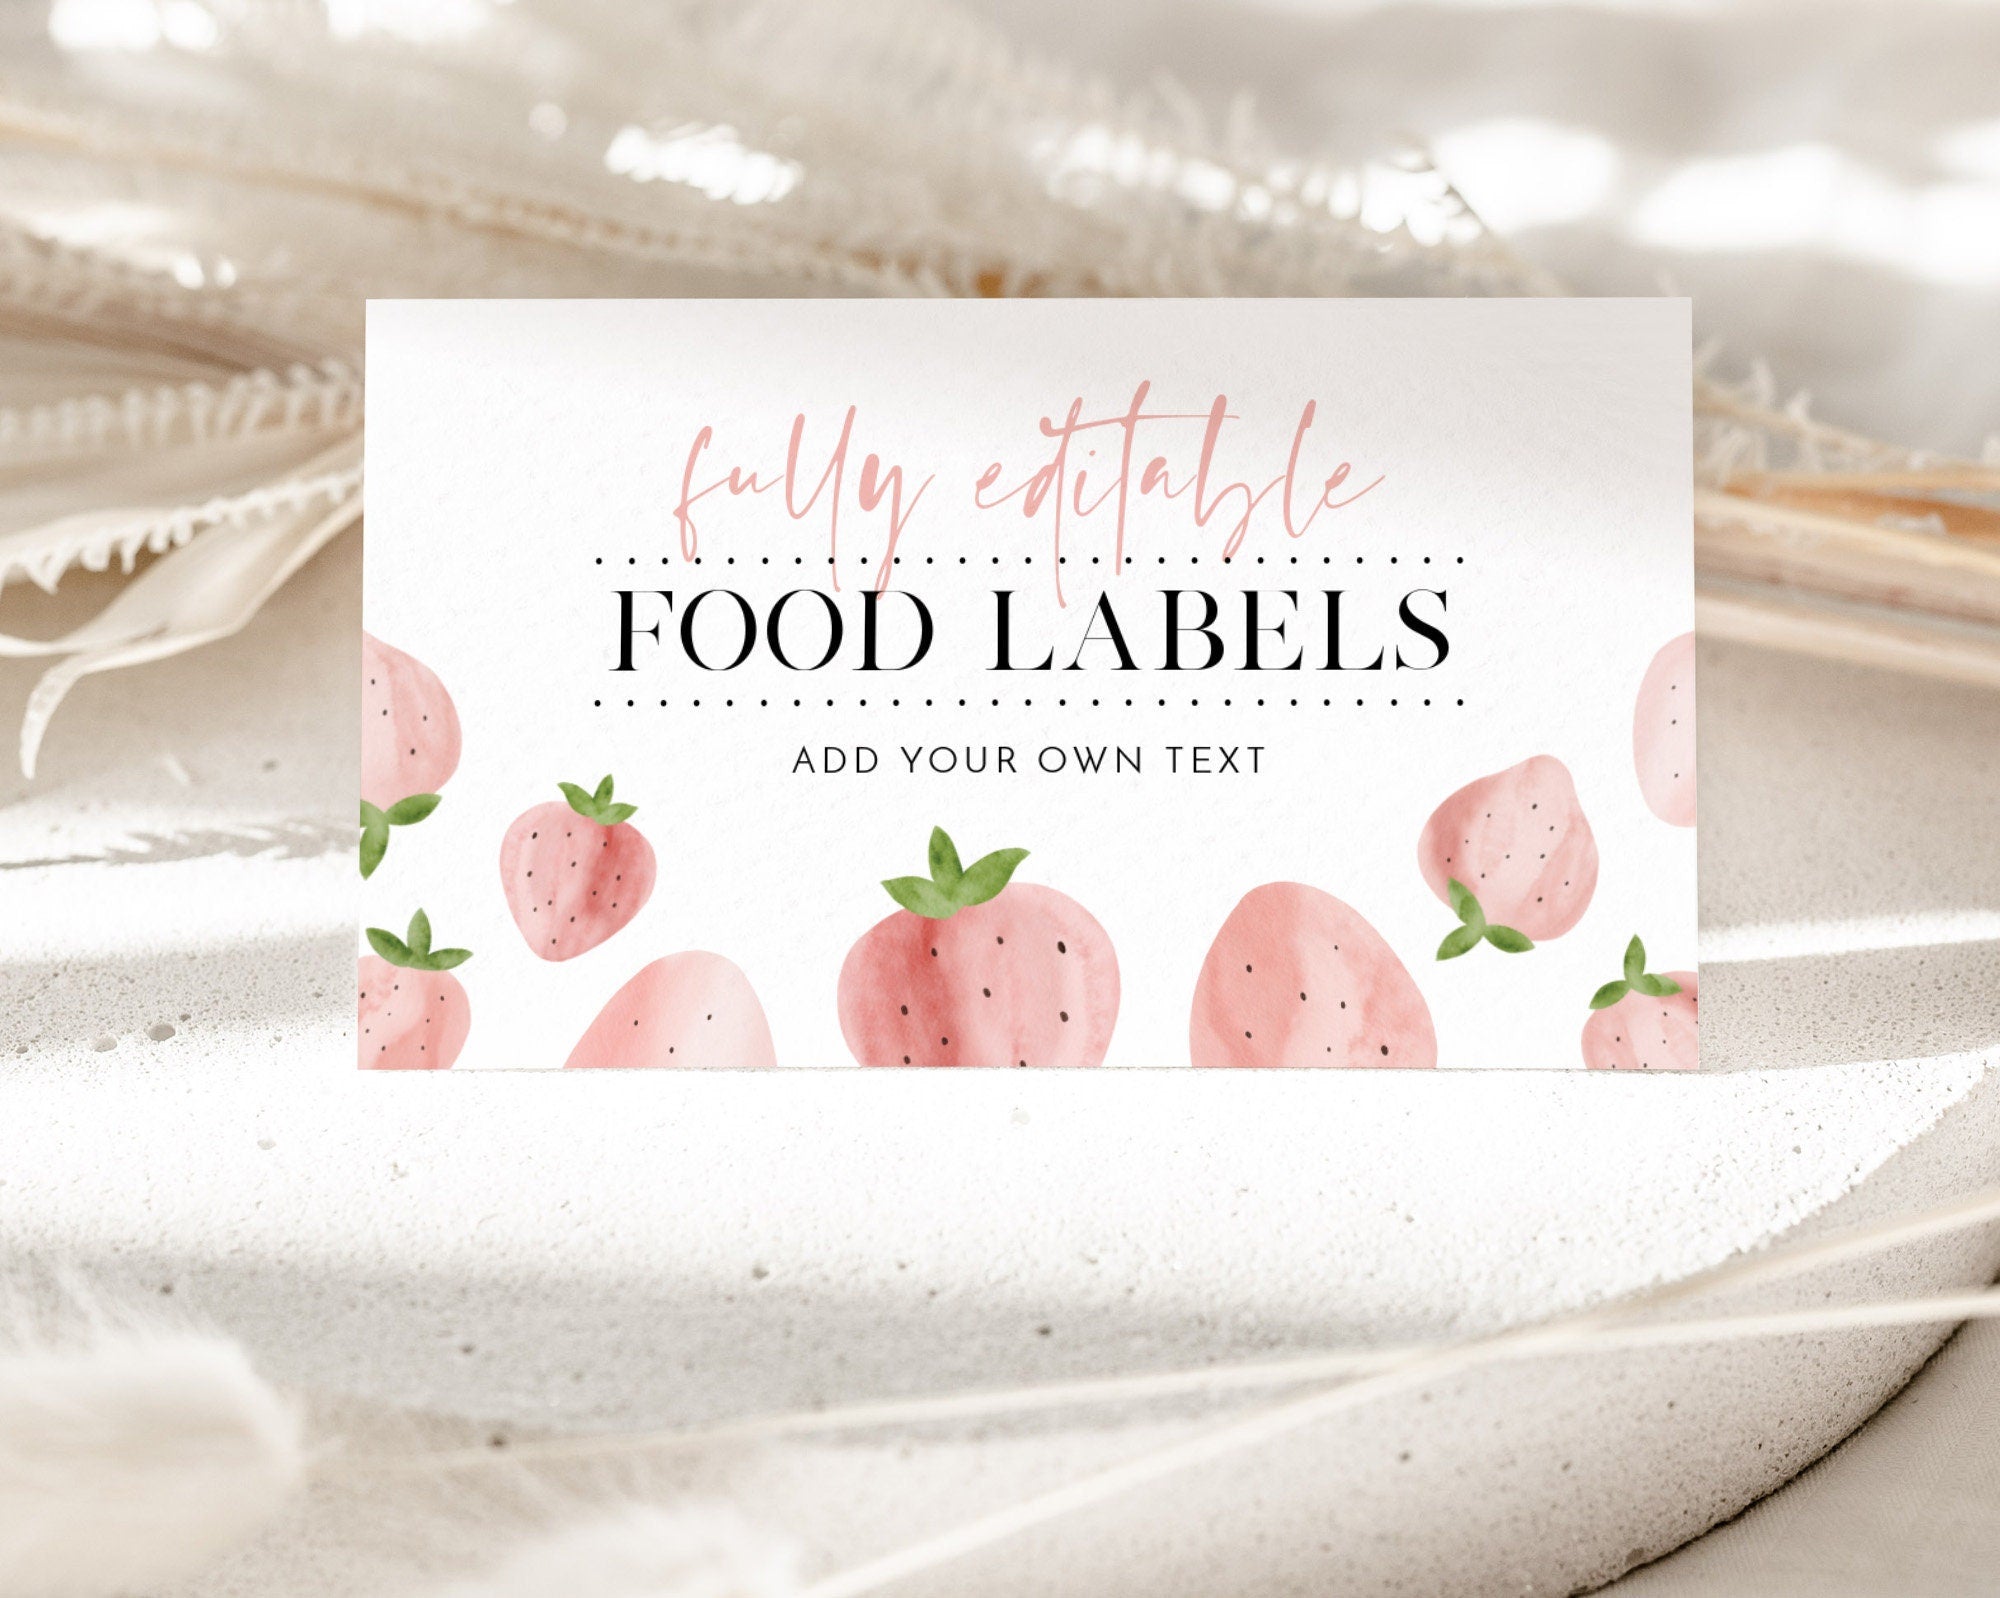 Strawberry Food Labels, Berry Food Label Card, Food Tent Card, Birthday Food Tags, Folded Food Cards, Tented Food Labels, Berry Food Cards